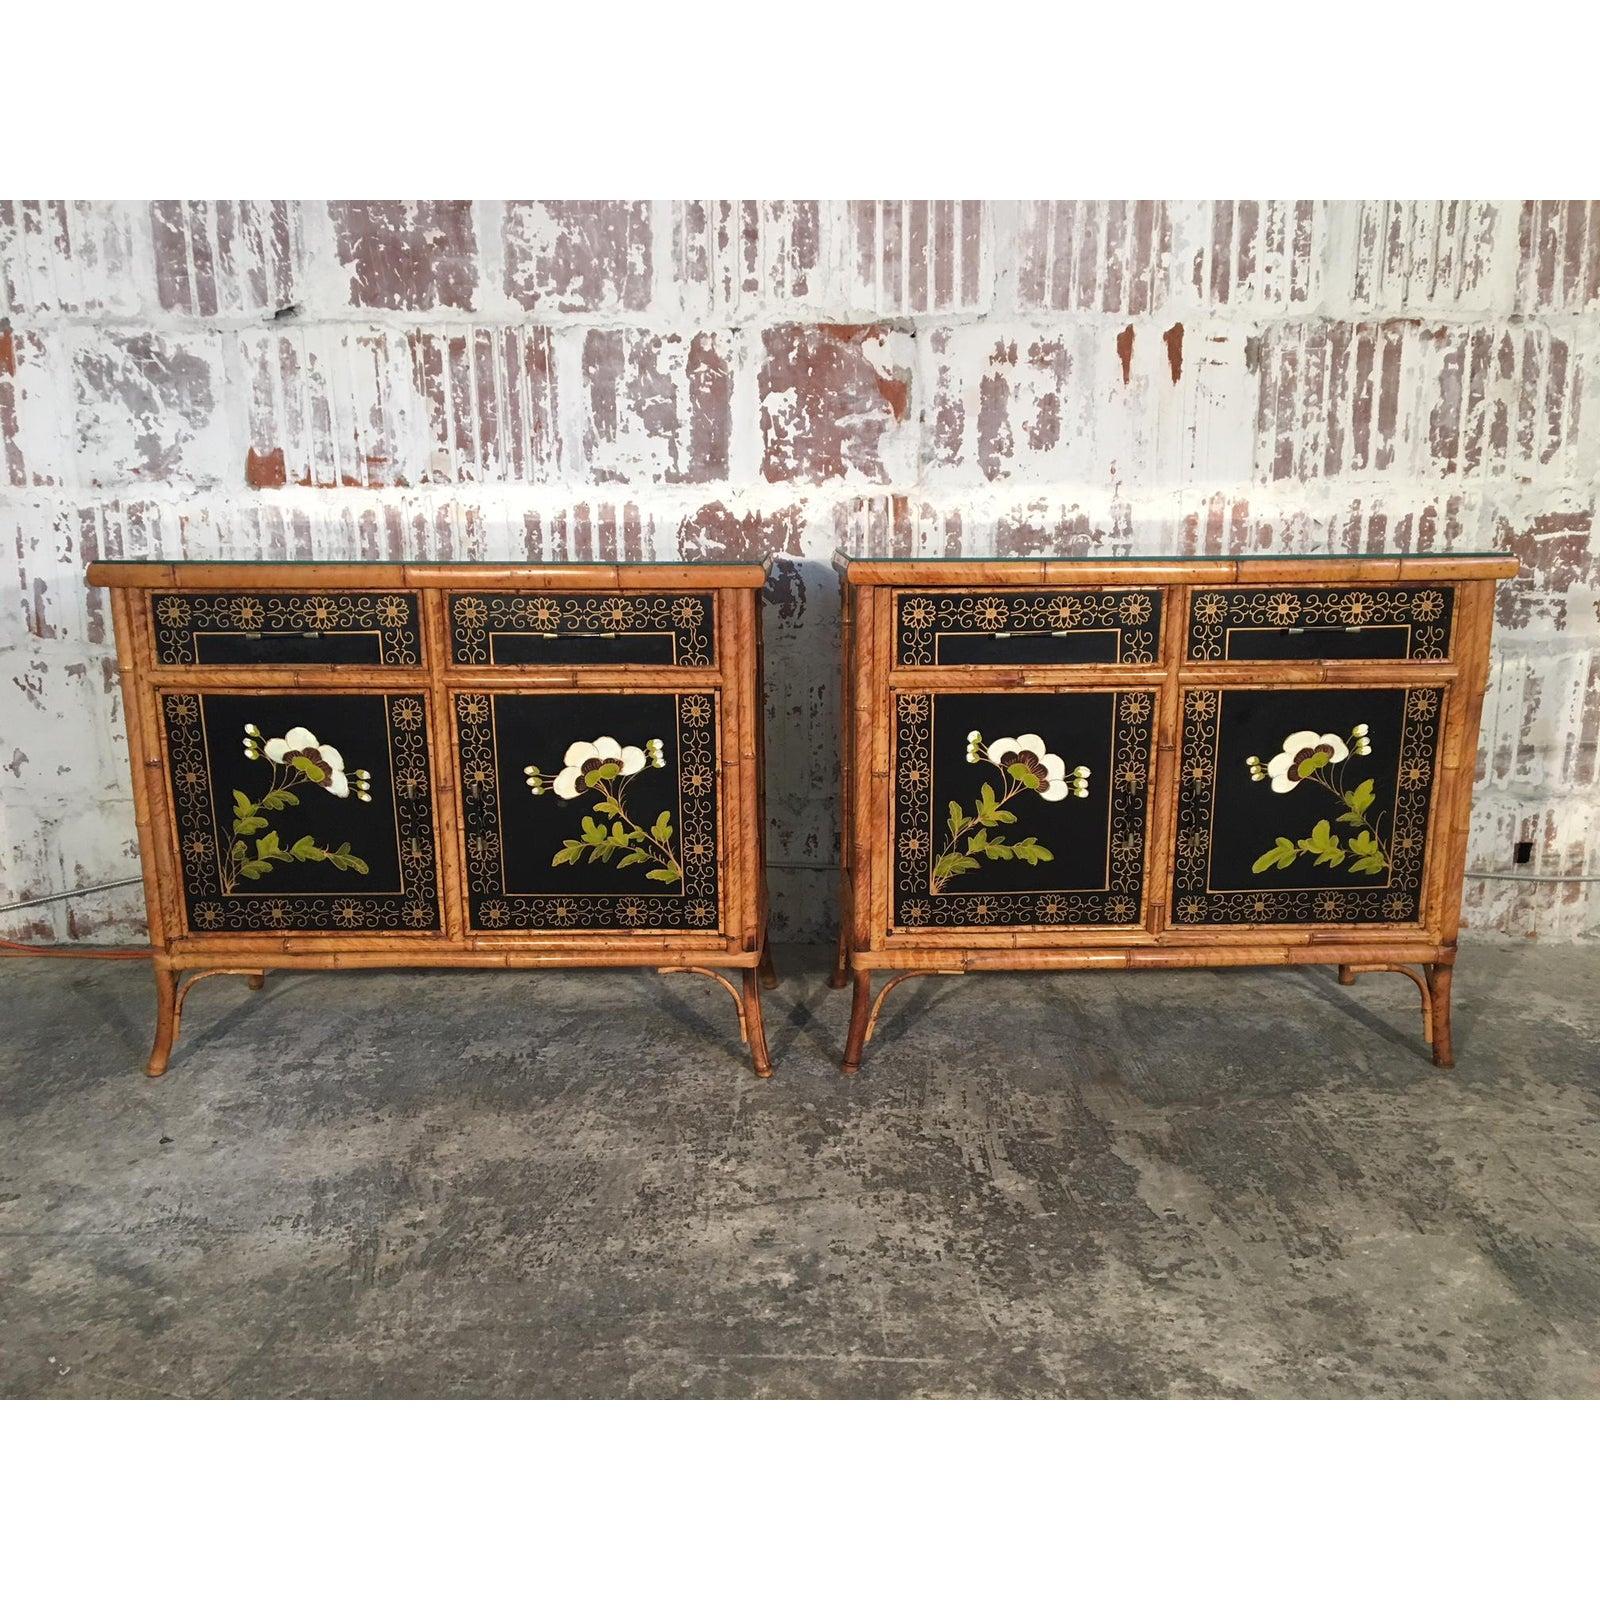 Twin Asian chinoiserie cabinets feature hand painted floral scenes and bamboo detailing. Dovetail joints, glass tops and brass hardware. Very good vintage condition with minor signs of age appropriate wear. One small chip on back corner of one glass